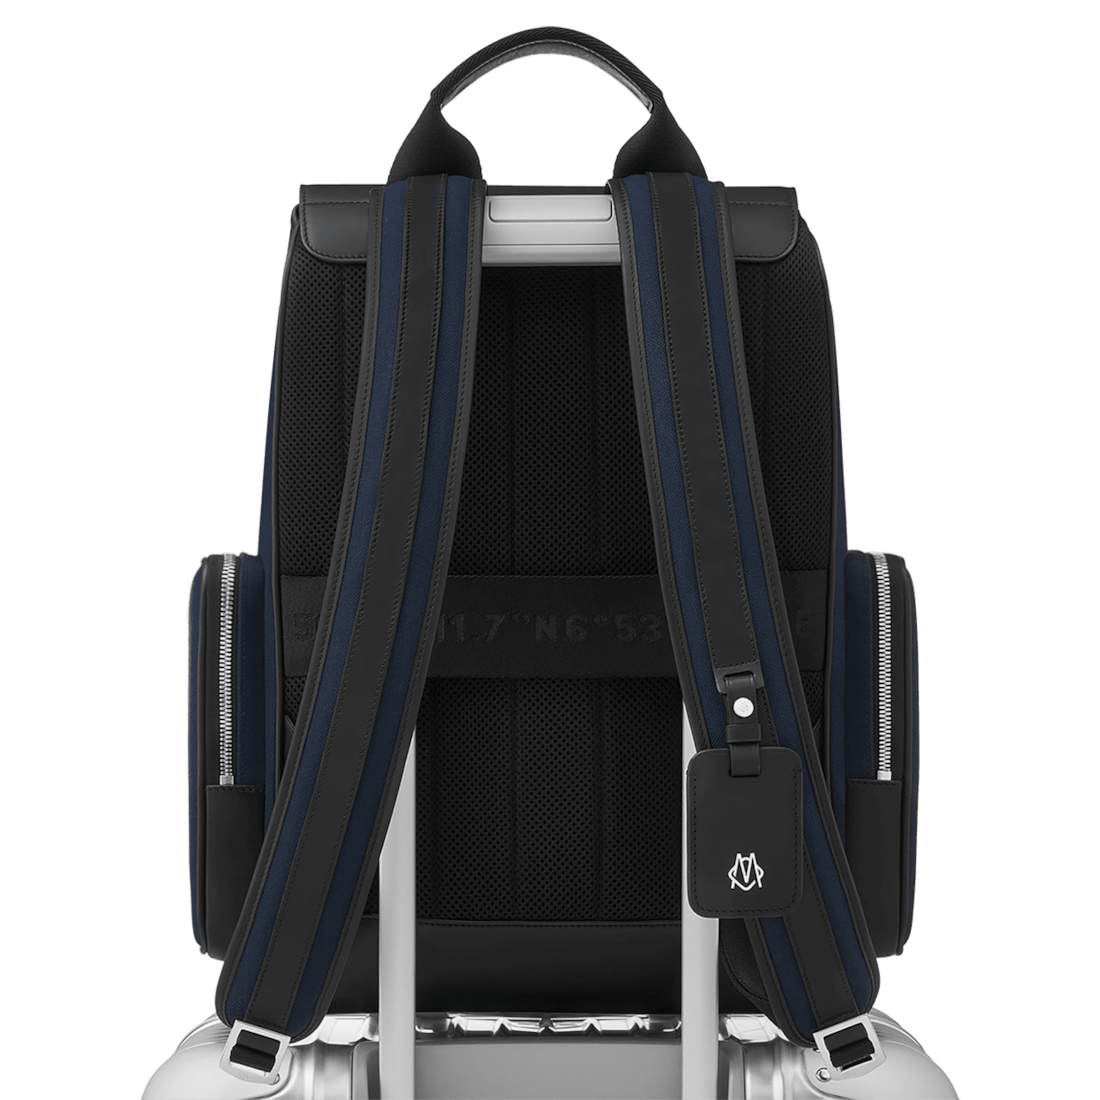 Flap Backpack Large in Leather & Canvas | Navy blue & Black | RIMOWA